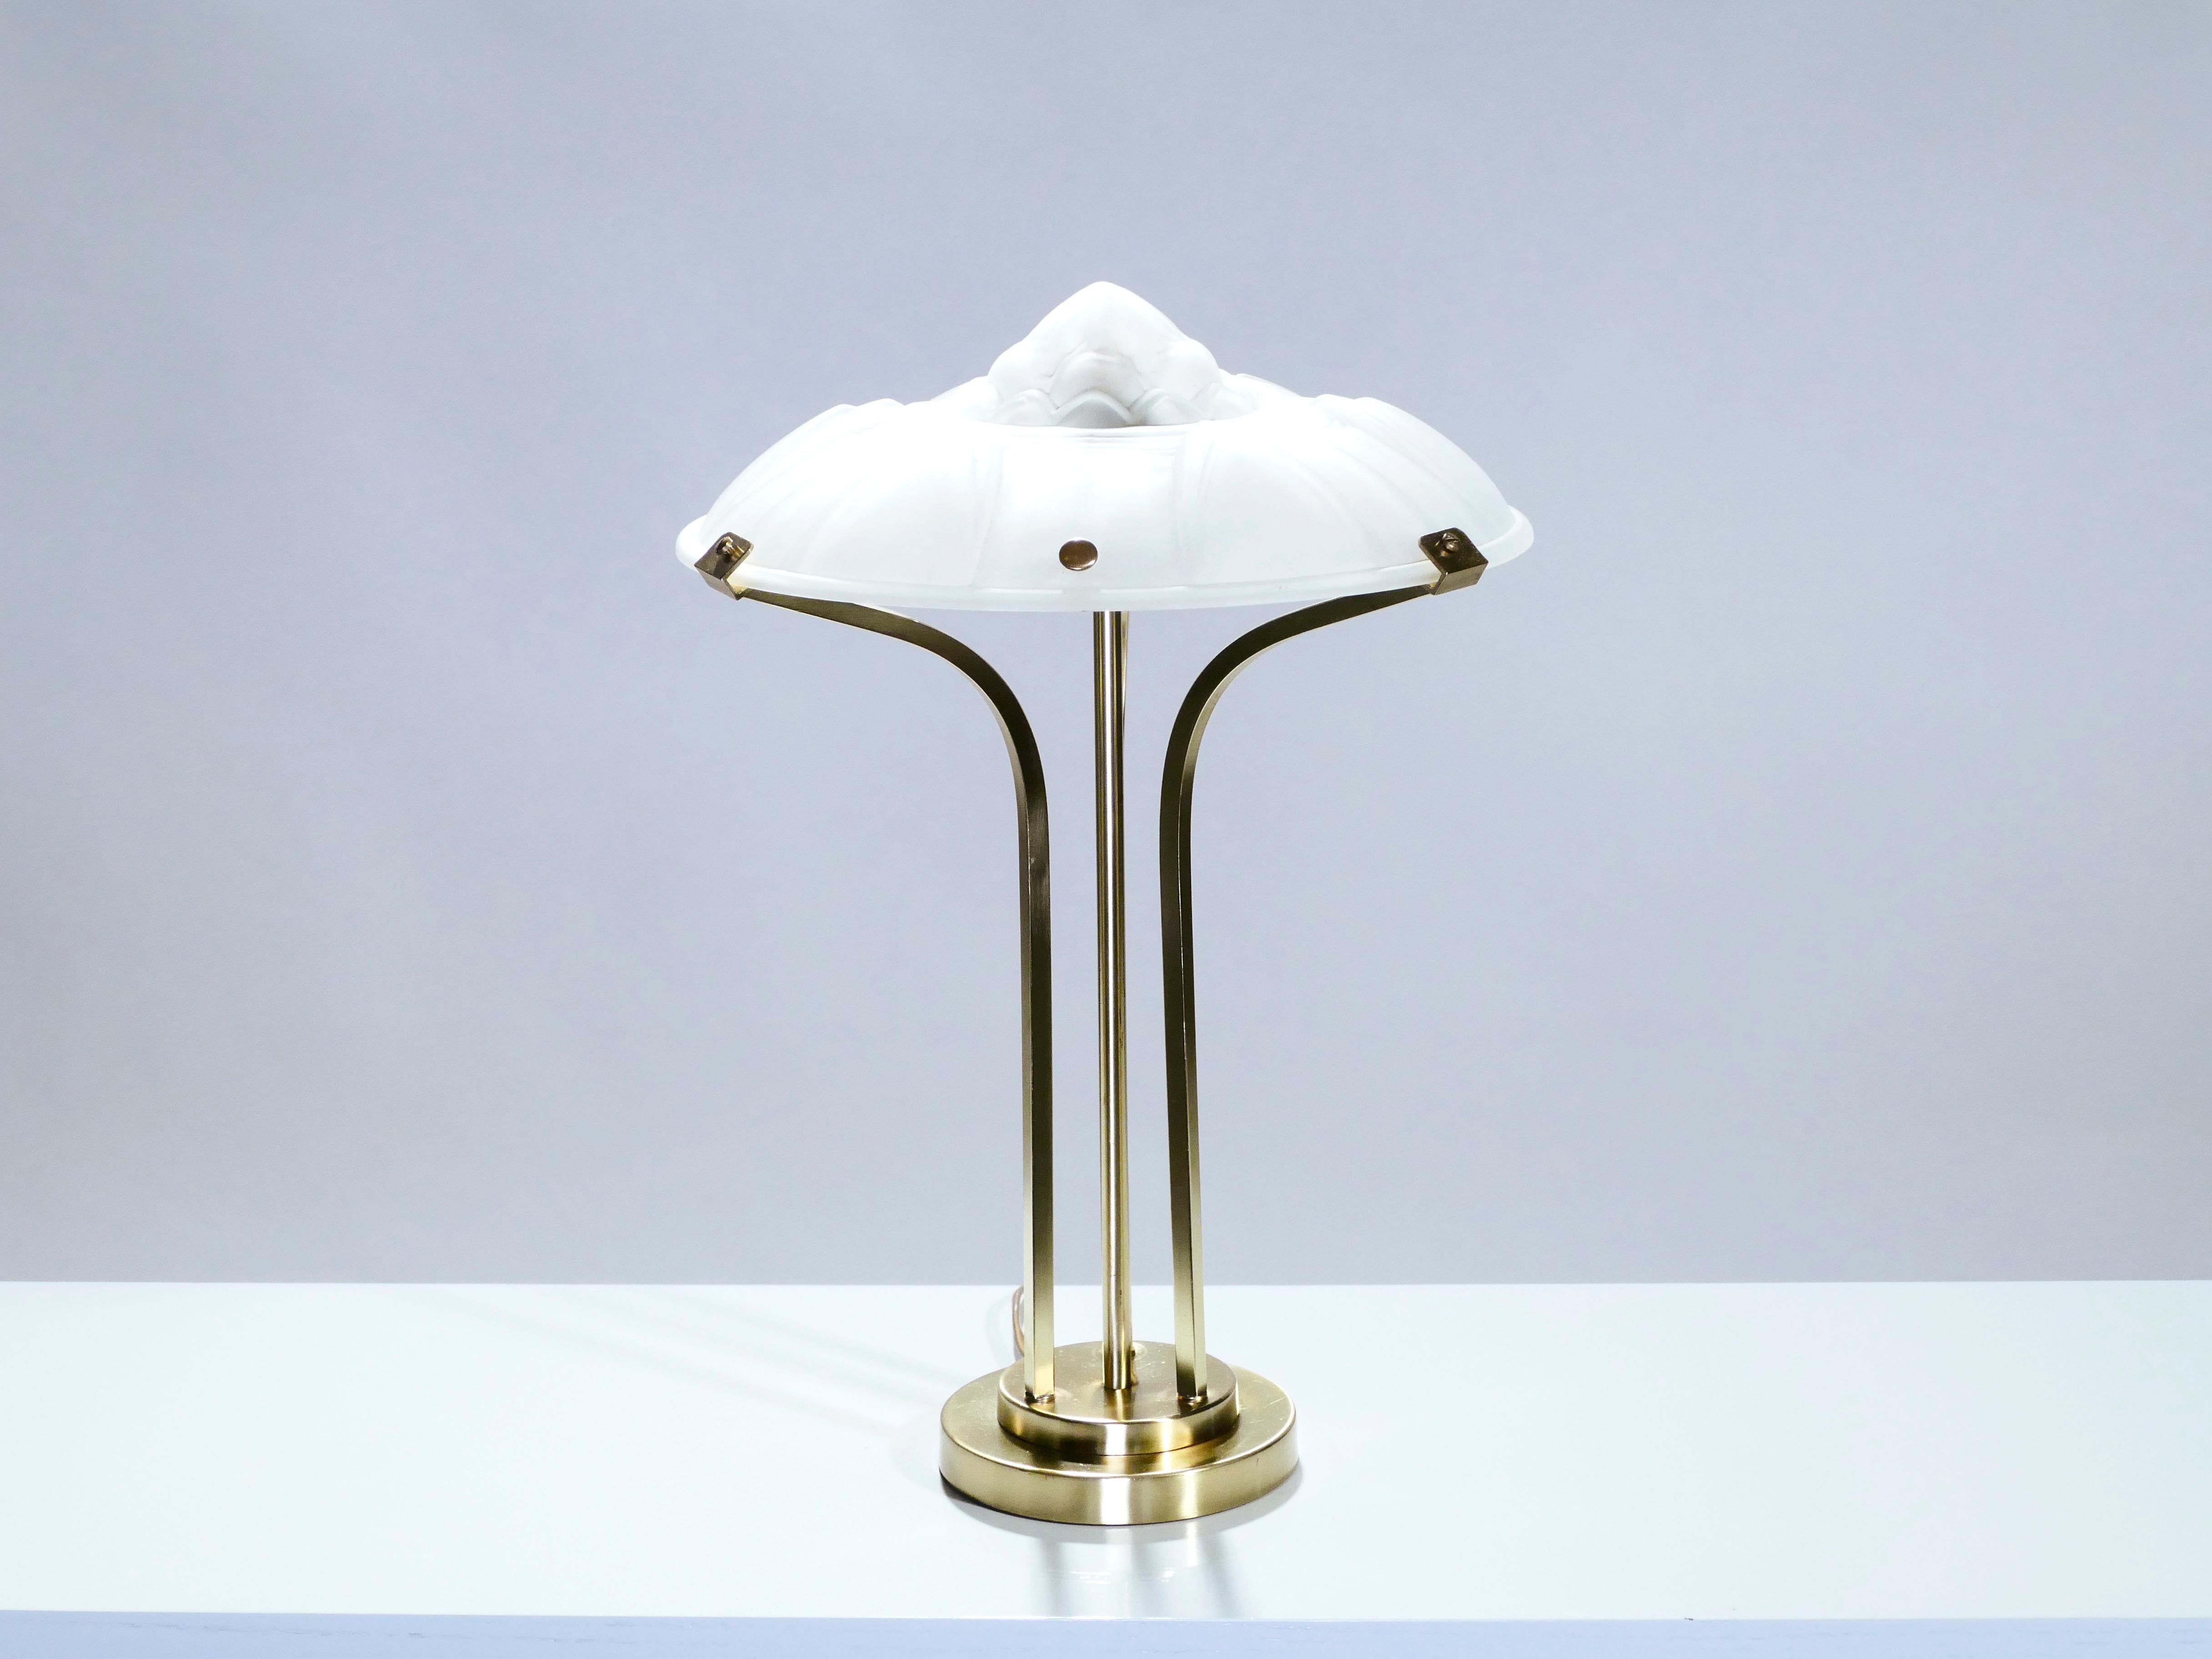 This Art Deco clear frosted glass lamp has a modernist appeal. Brass forms the structure: a central straight rod flanked by two dramatically curved outer rods atop a simple tiered base. The top is made from lovely, cloudy opaline glass. The glass is